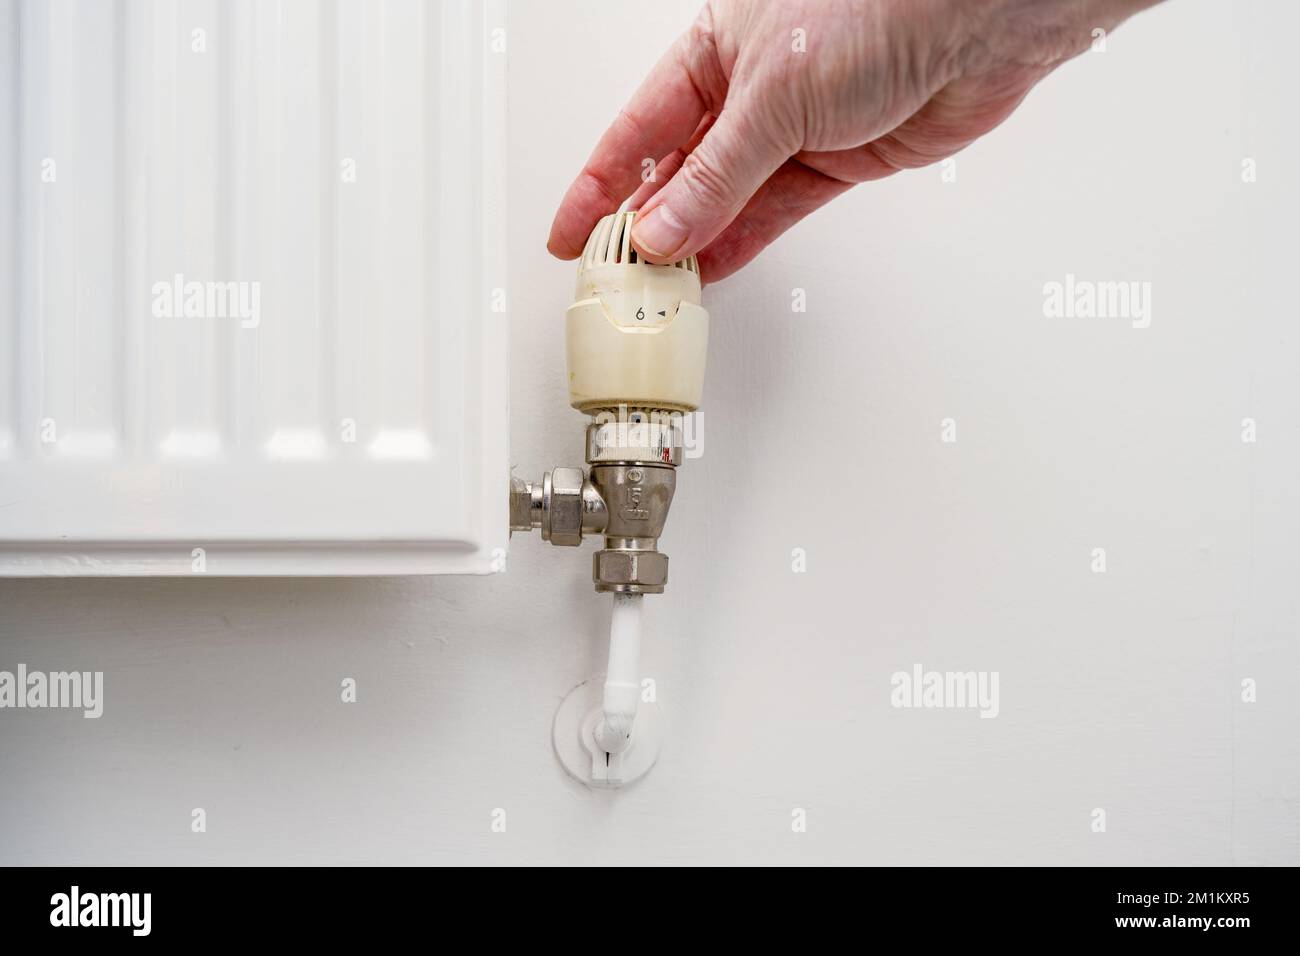 close up of plumber person turning up a thermostatically controlled radiator valve. Stock Photo